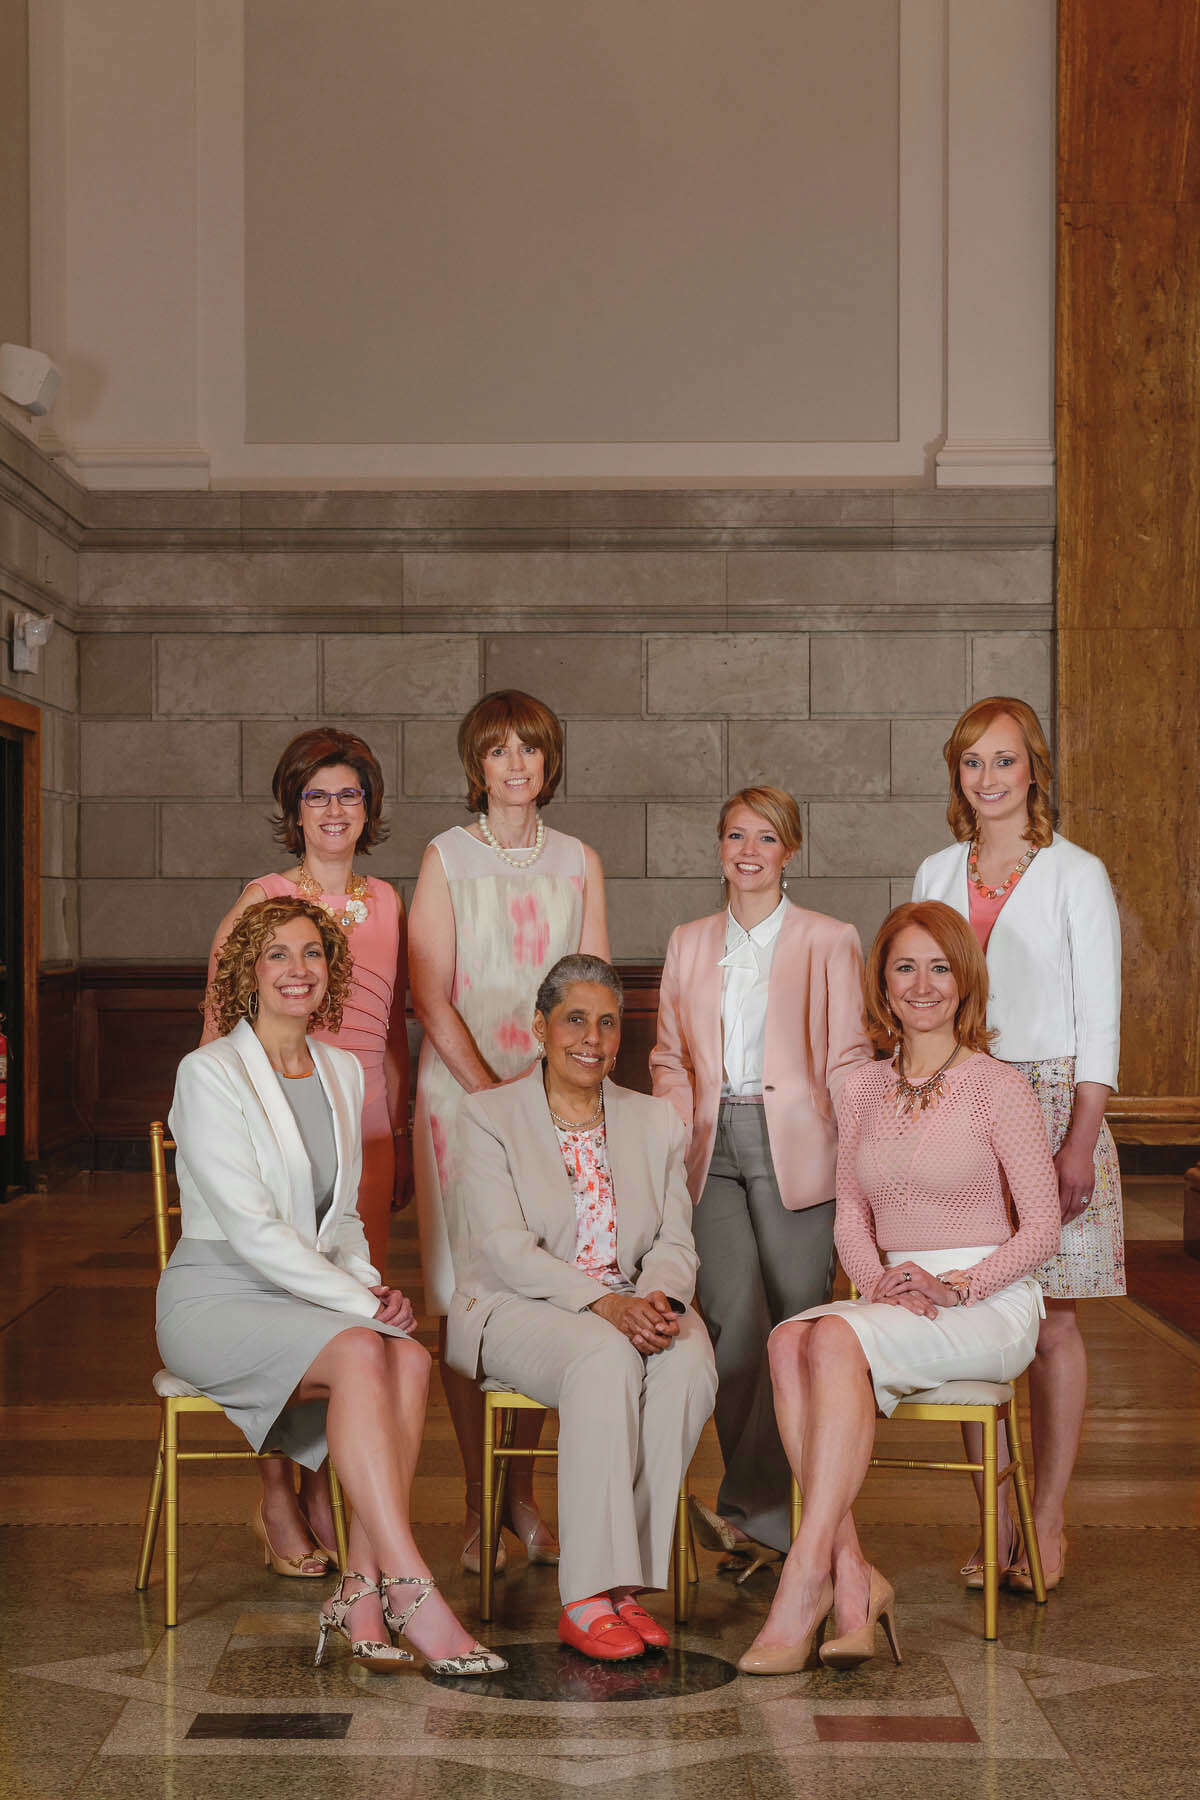 2015 Women of Excellencefrom left to right : Denise Gonick, Trudy Hall, Miriam Dushane, Kelsey Carr, Laura Petrovic, Barbara Smith, Andrea Crisafulli Russo